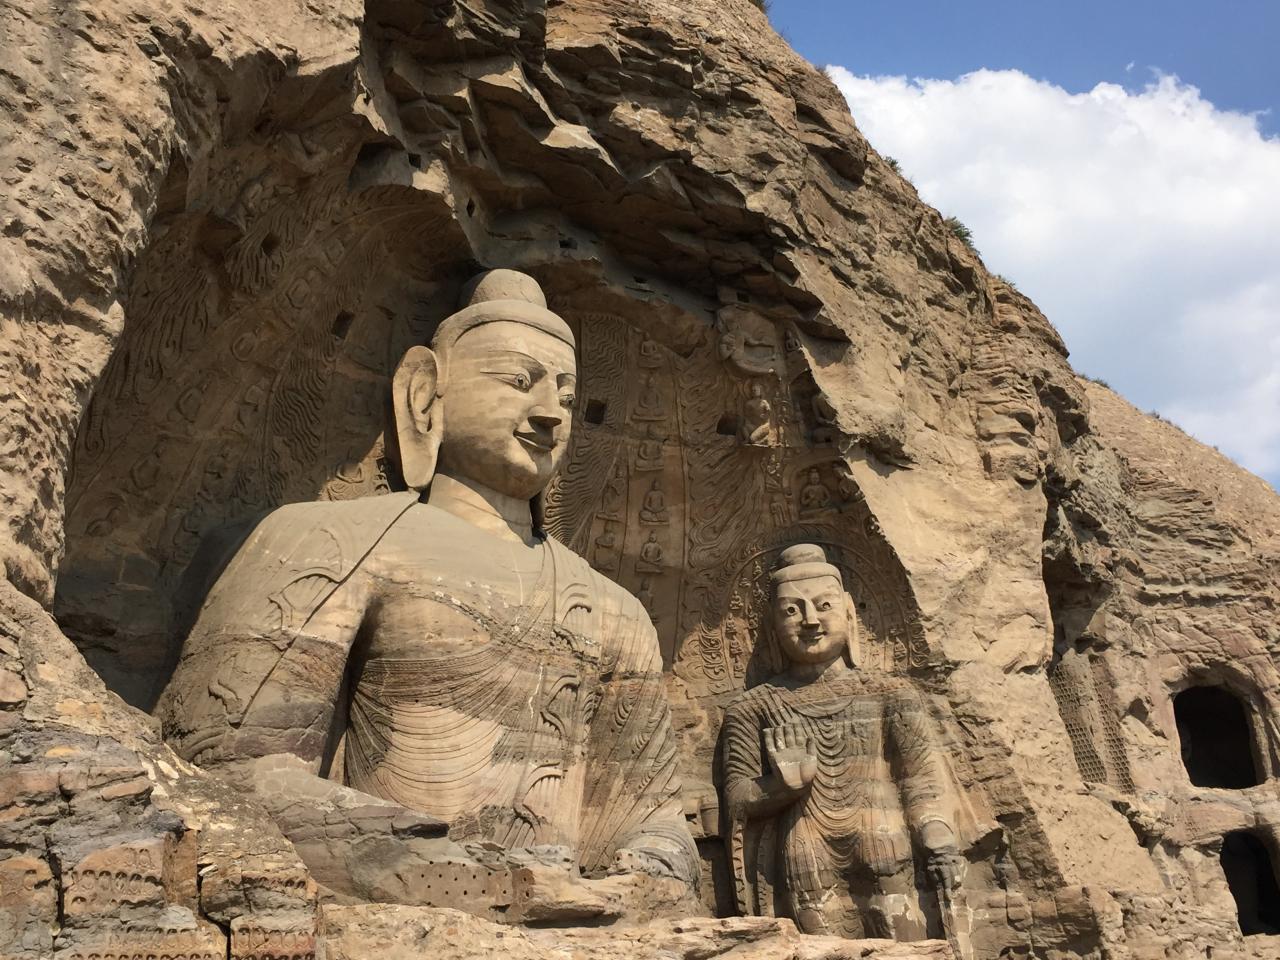 Just about 4 hours drive from Beijing is Datong, a historic city, which used to be the capital for 3 Chinese dynasties. Even thou it is located in the...